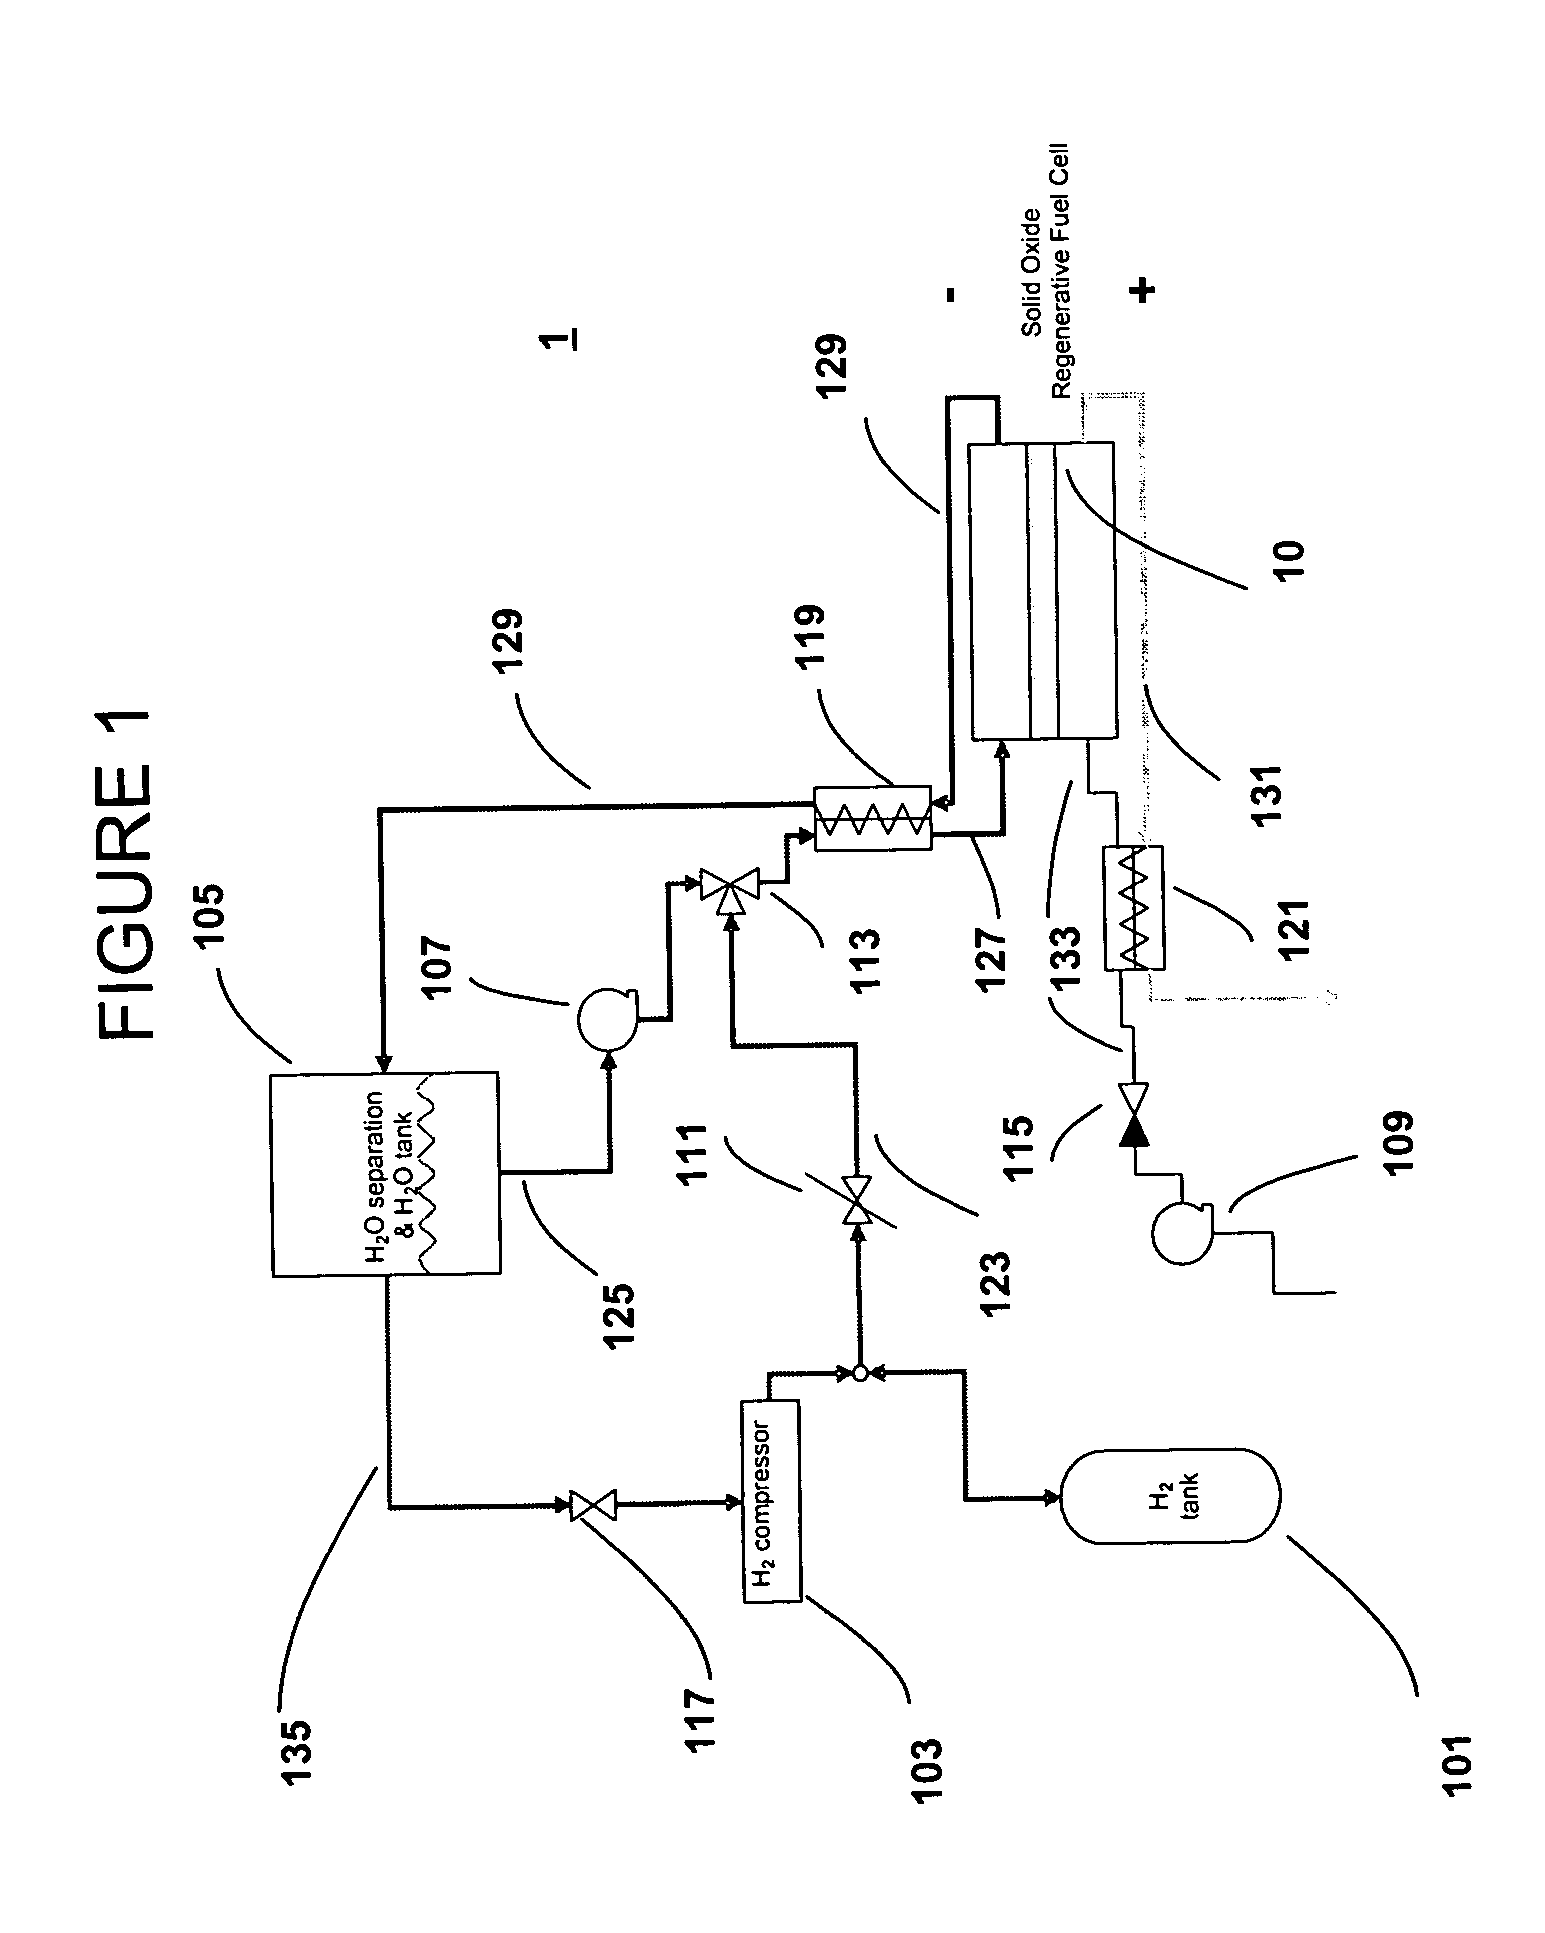 SORFC system with non-noble metal electrode compositions